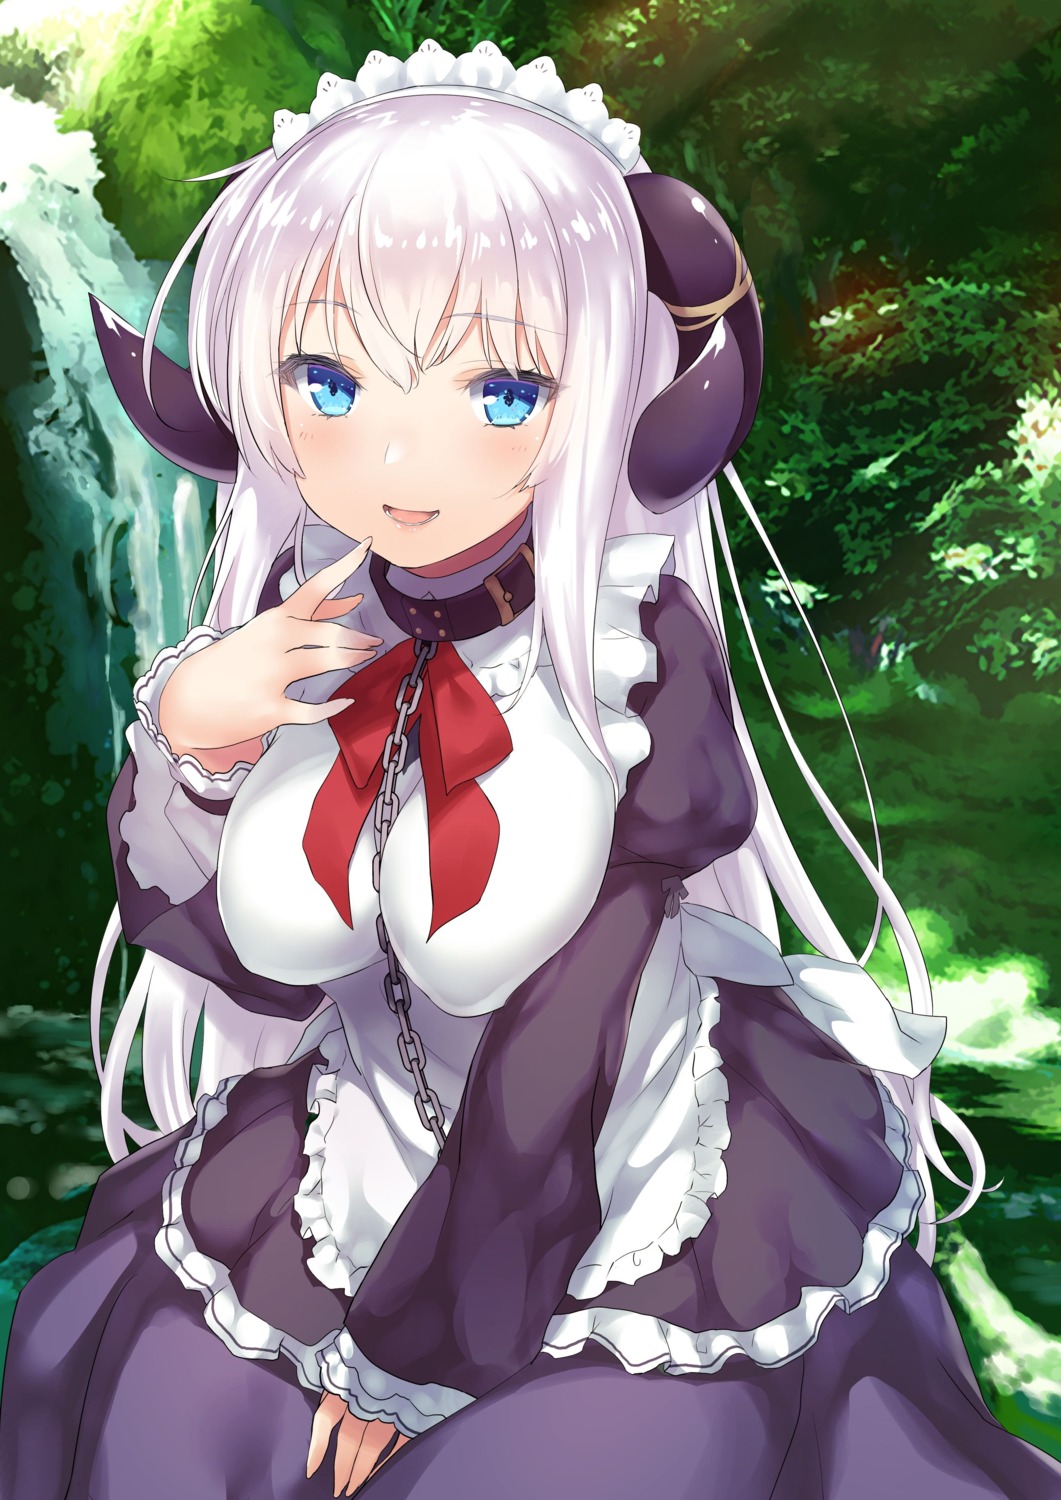 aliasing maid possibly_upscaled? tagme